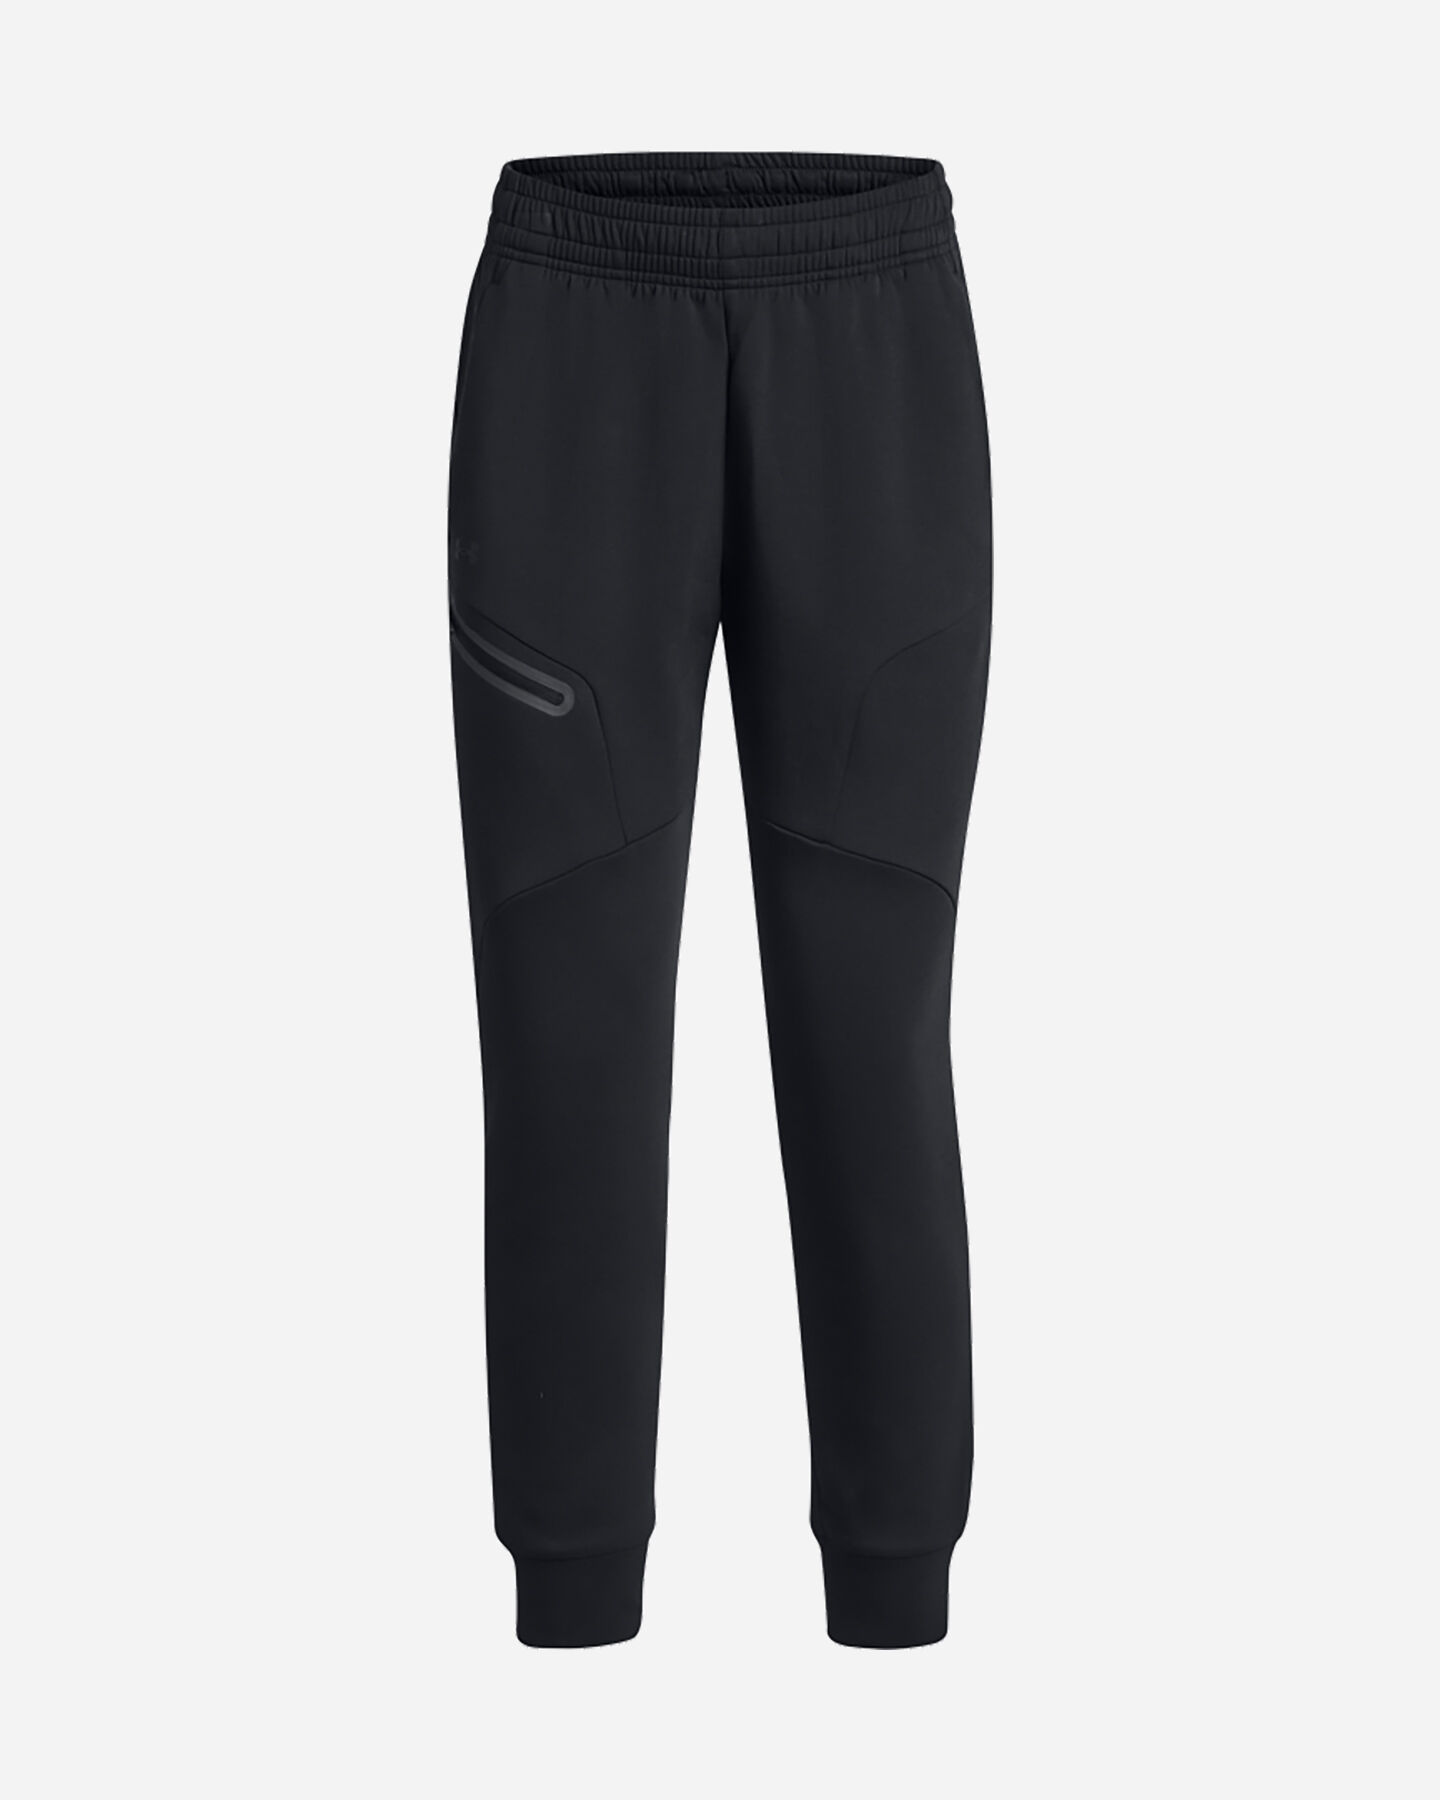  Pantalone UNDER ARMOUR UNSTOPPABLE FLC W S5579700|0001|XS scatto 0